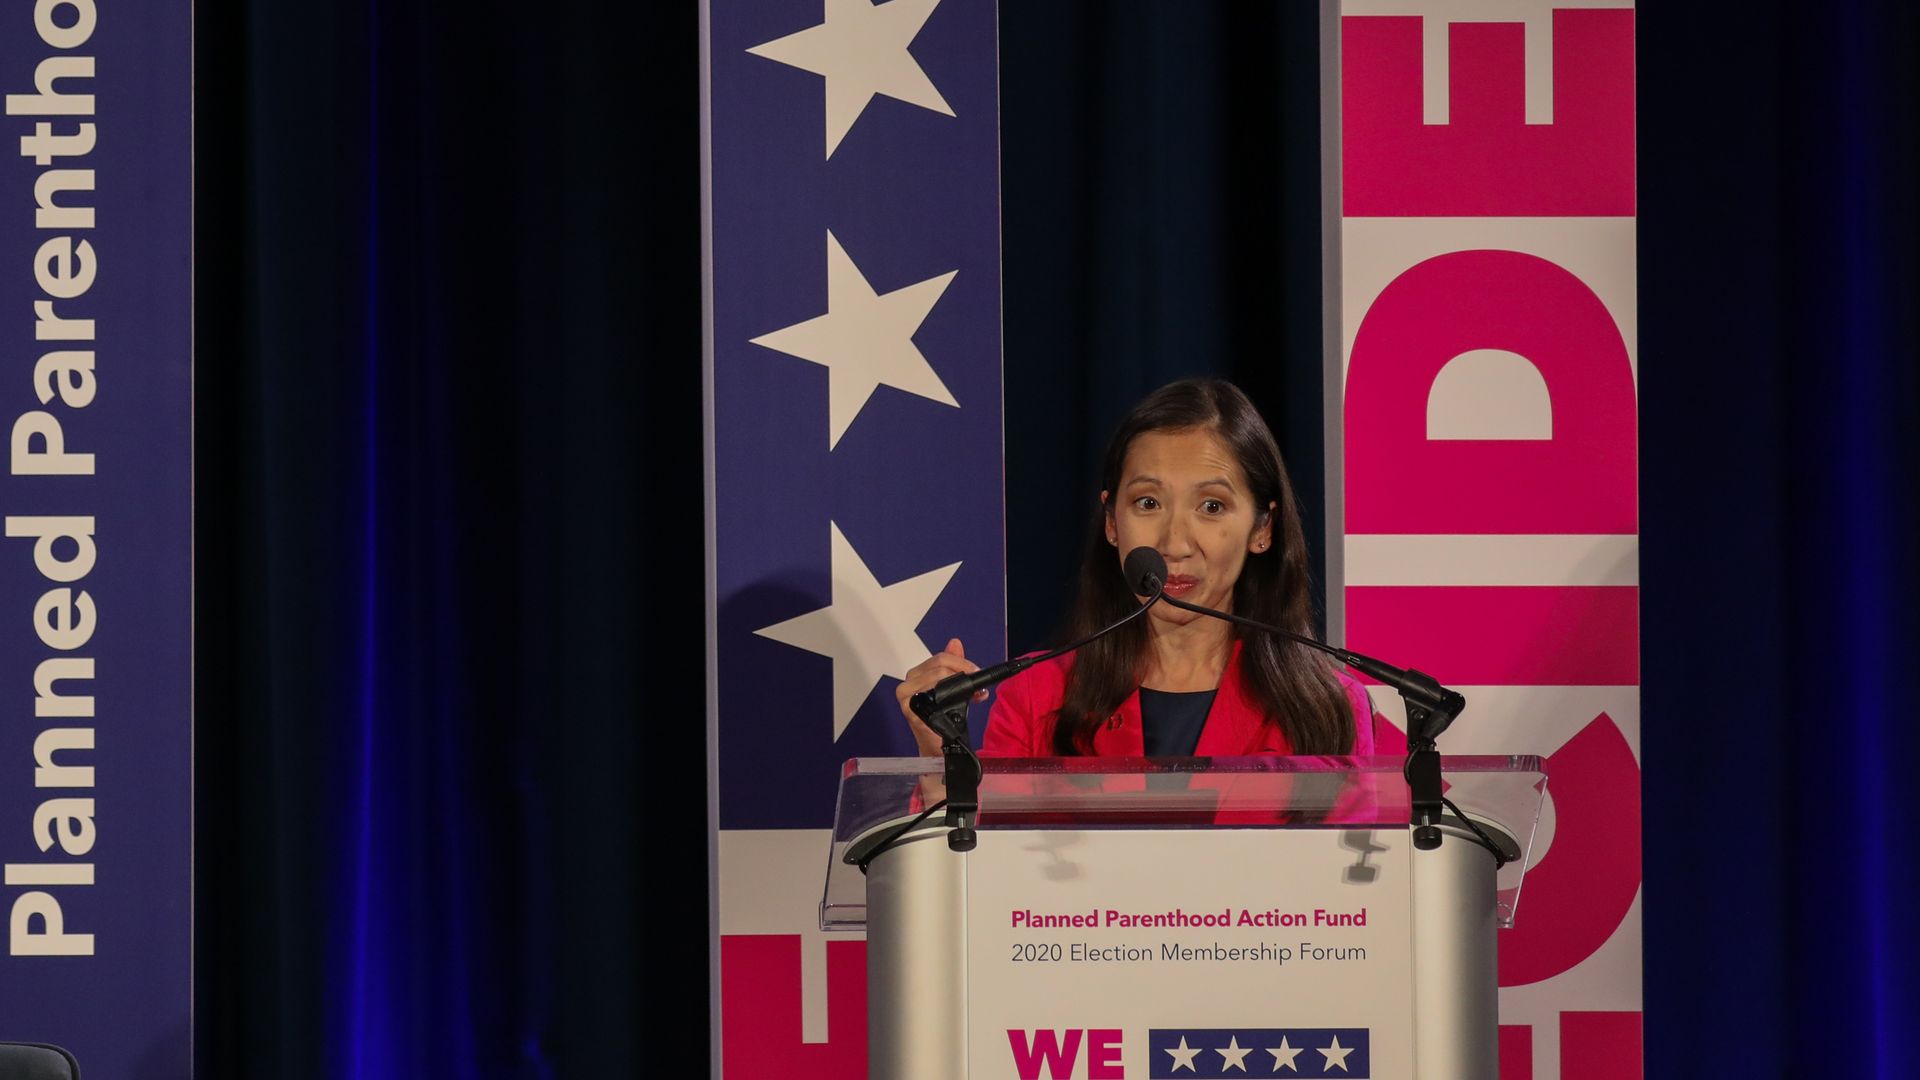 Dr. Leana Wen addresses the crowd at the We Decide: Planned Parenthood Action Fund 2020 Election Forum to Focus on Abortion and Reproductive Rights event in Columbia, SC on June 22